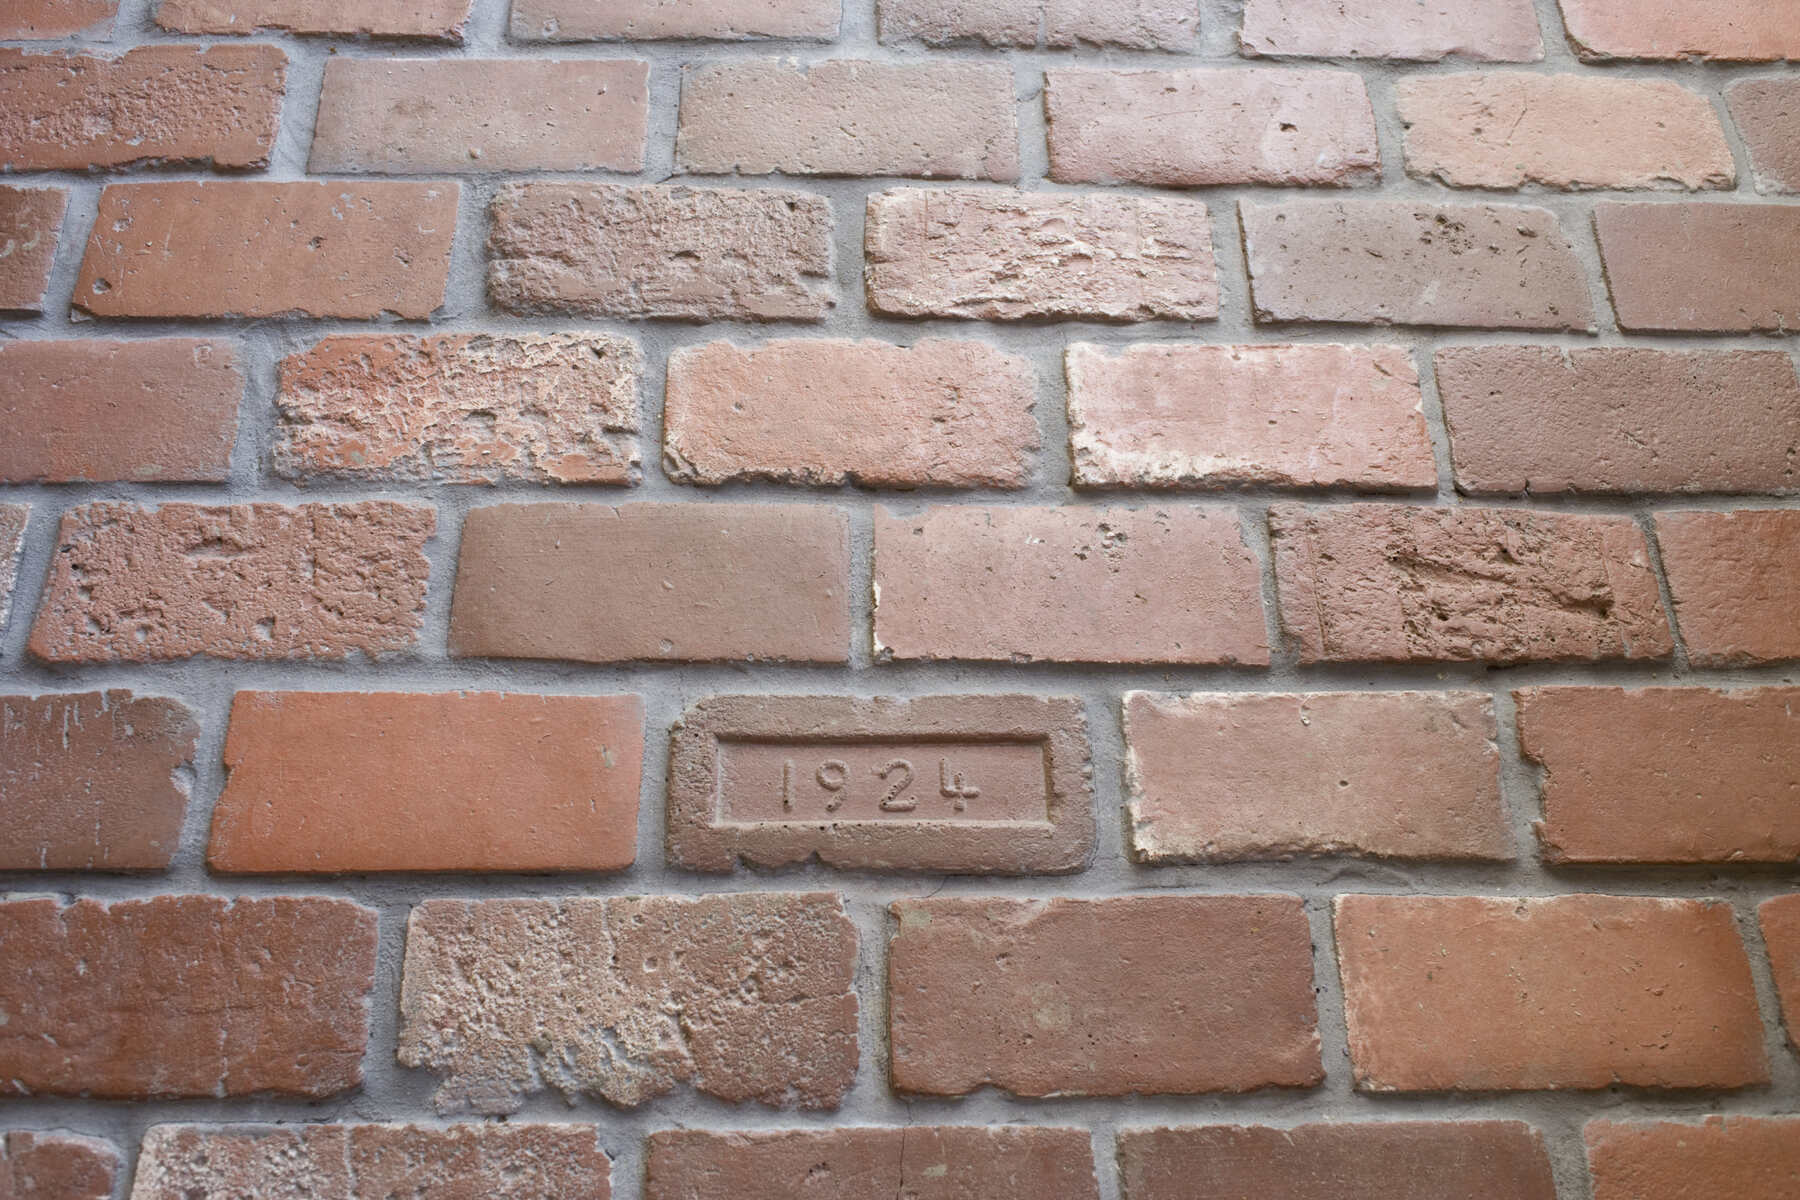 How To Get Wax Off Of Brick